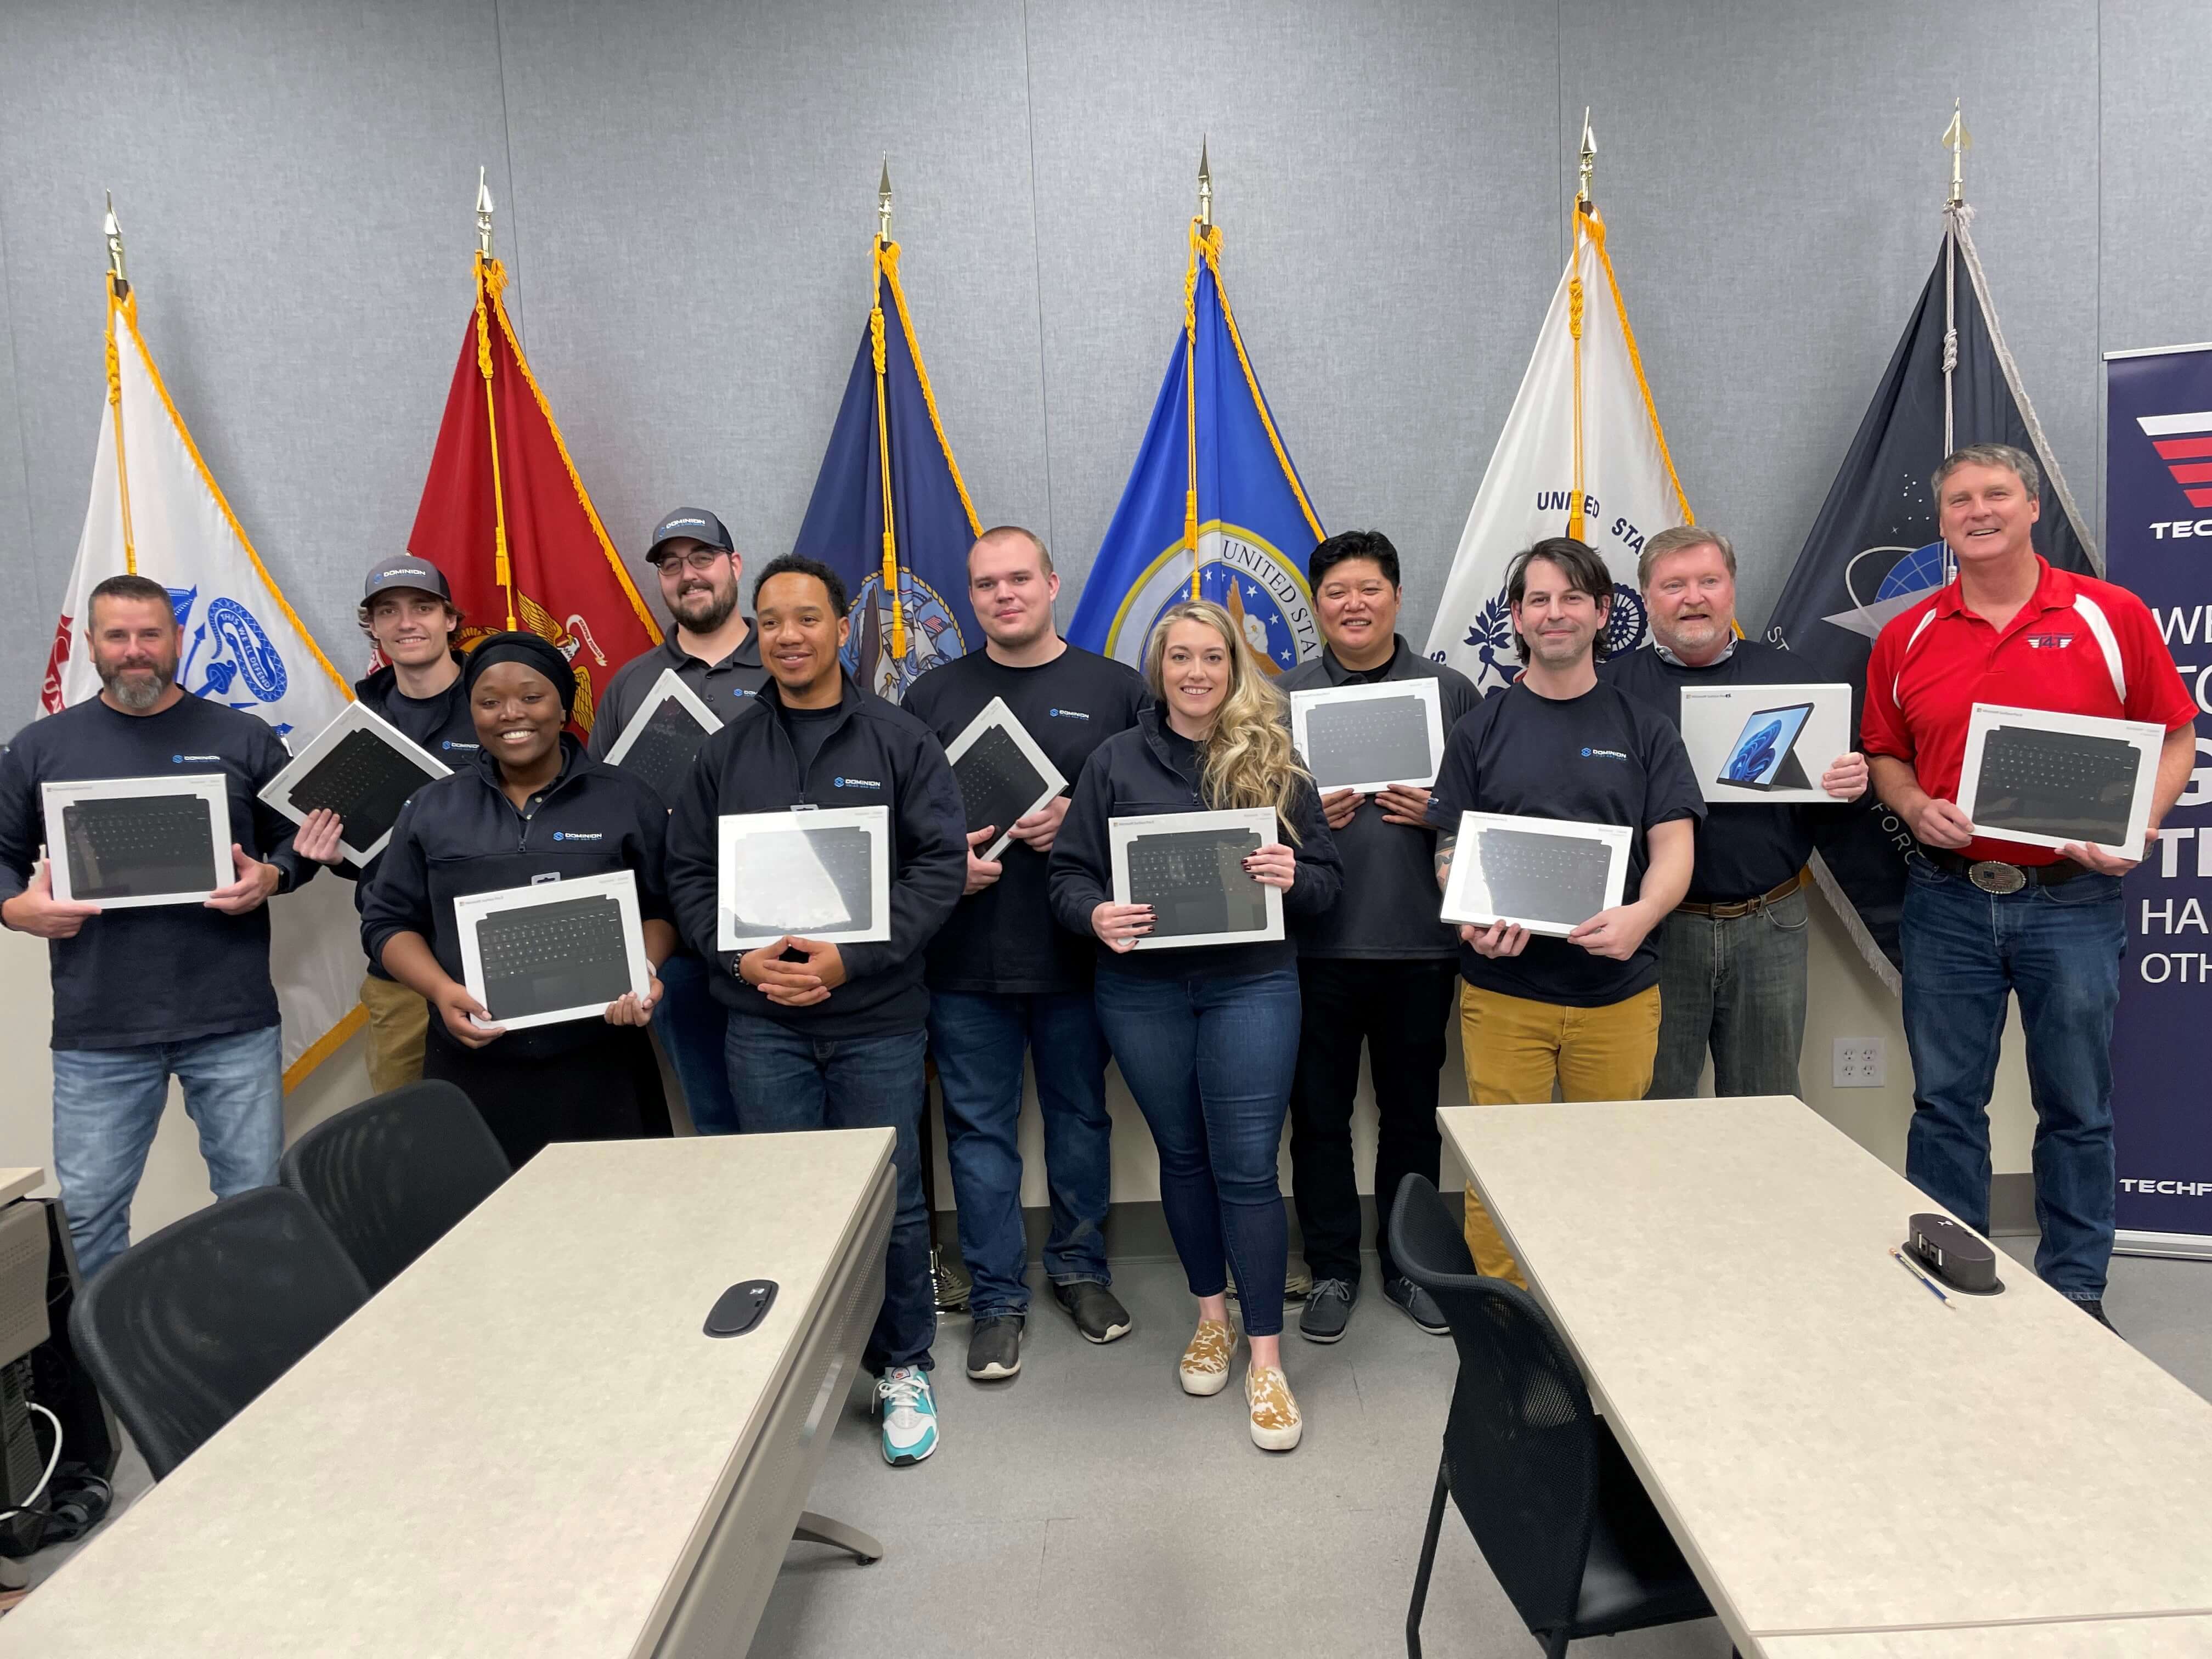 Donation of 16 Microsoft Surface Pro X laptops and keyboards to Tech for Troops